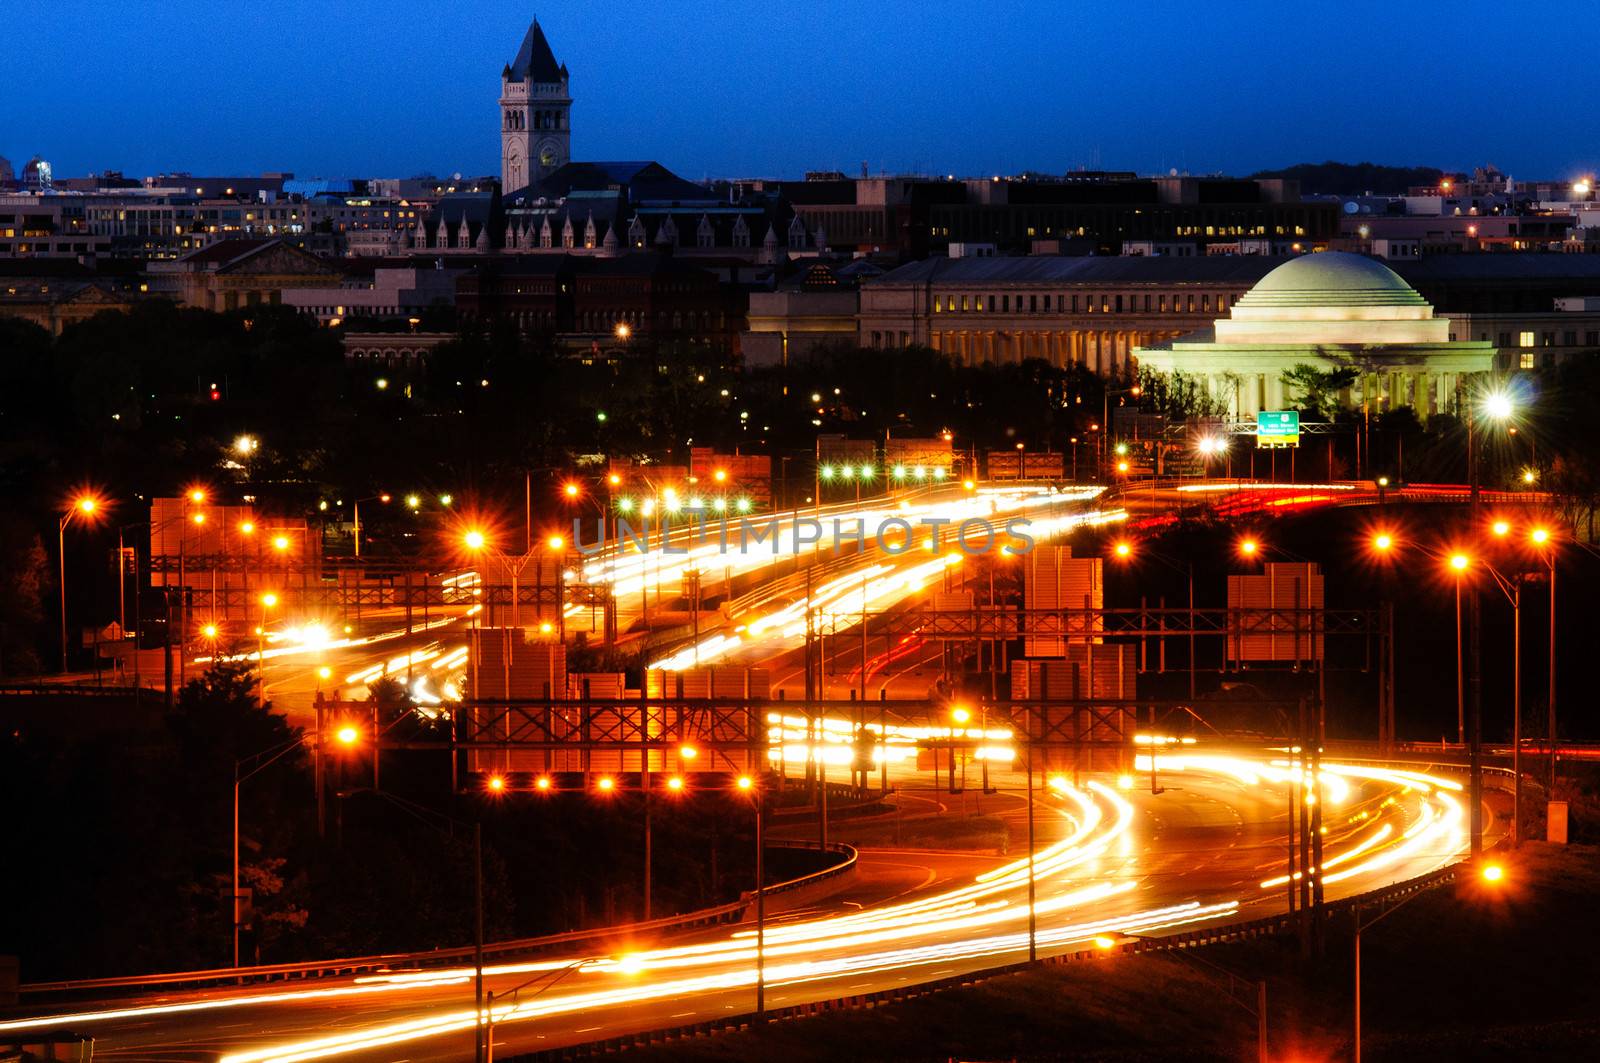 Traffic on a highway at night with a memorial in the background, Jefferson Memorial, Tidal Basin, Washington DC, USA